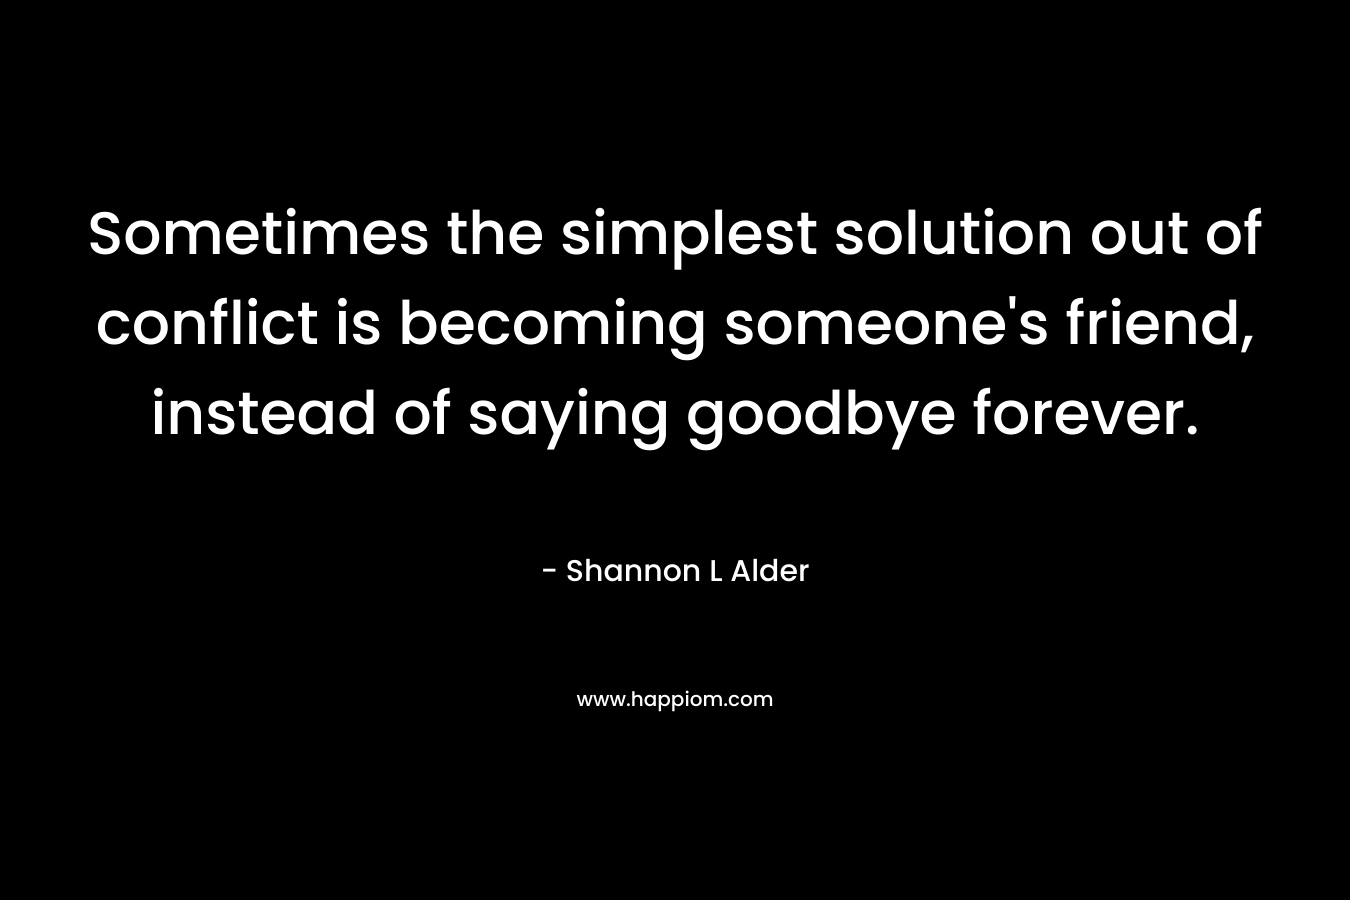 Sometimes the simplest solution out of conflict is becoming someone's friend, instead of saying goodbye forever.